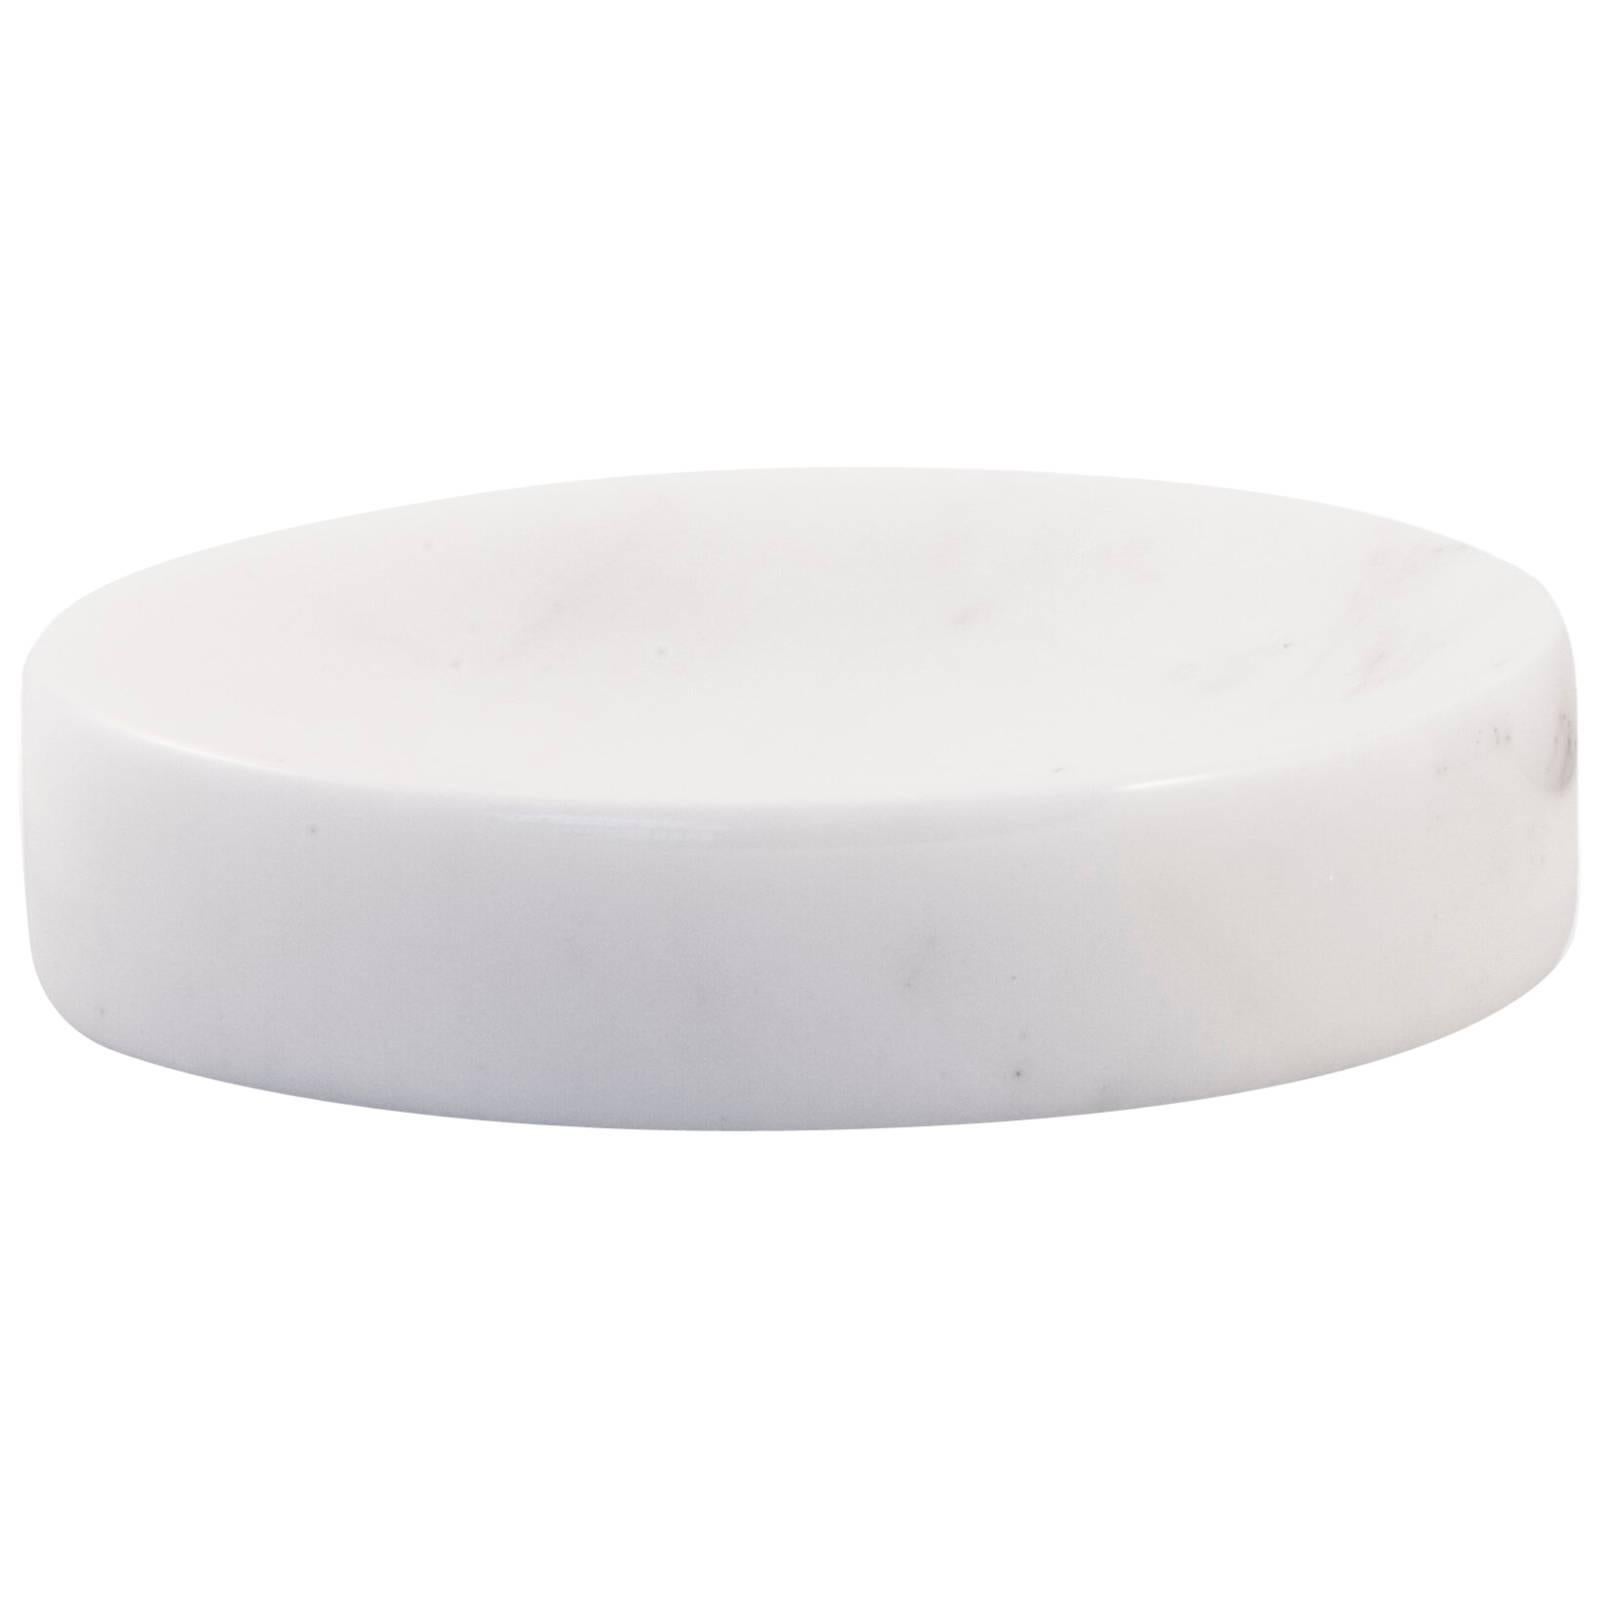 Handmade Rounded Soap Dish in White Carrara Marble